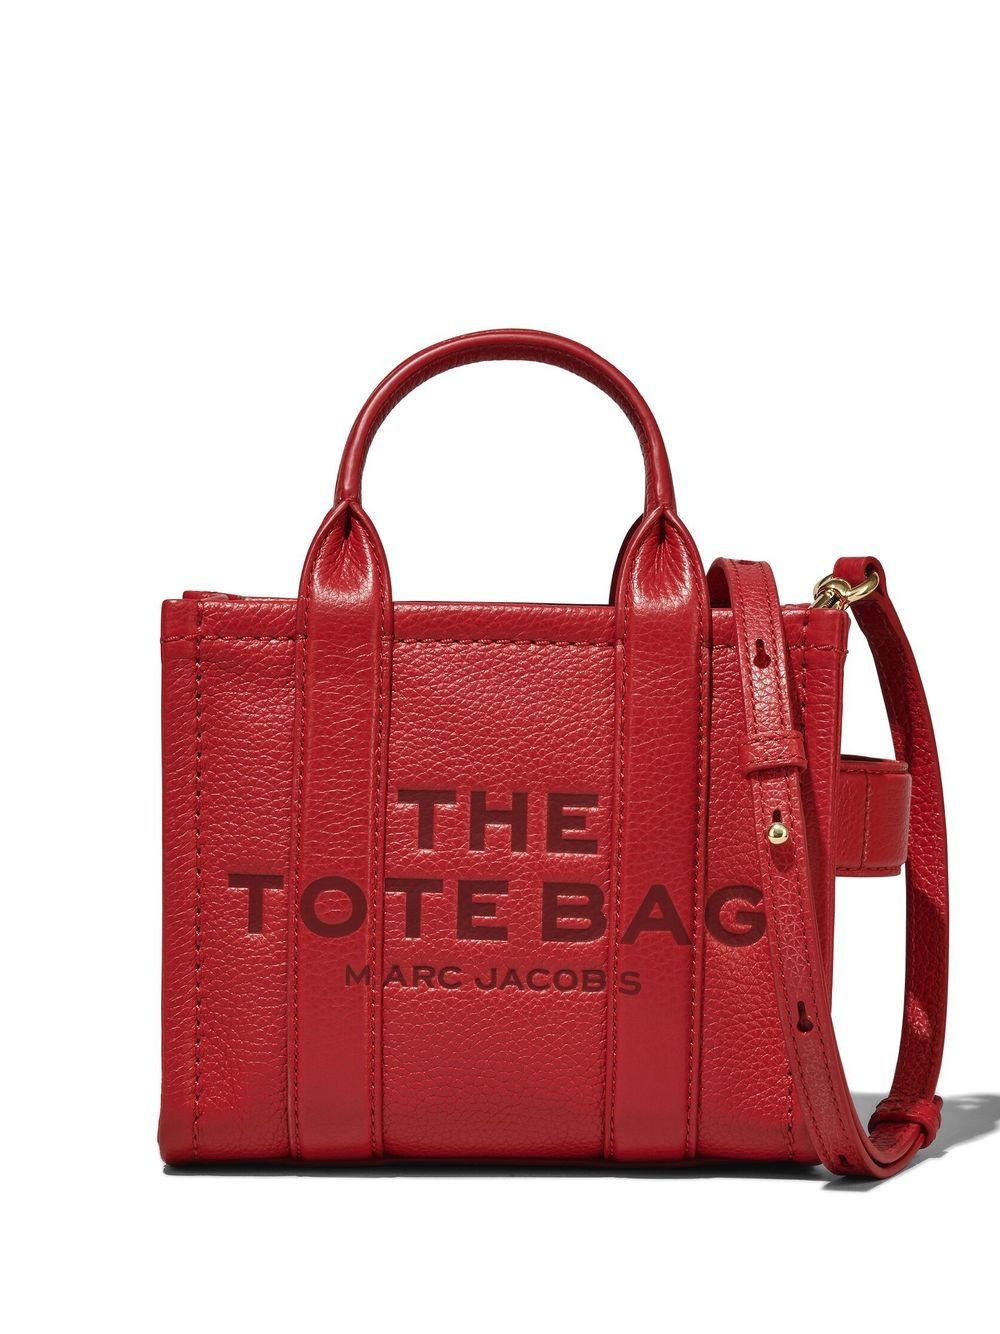 Marc Jacobs The Leather Crossbody Tote bag - Red von Marc Jacobs